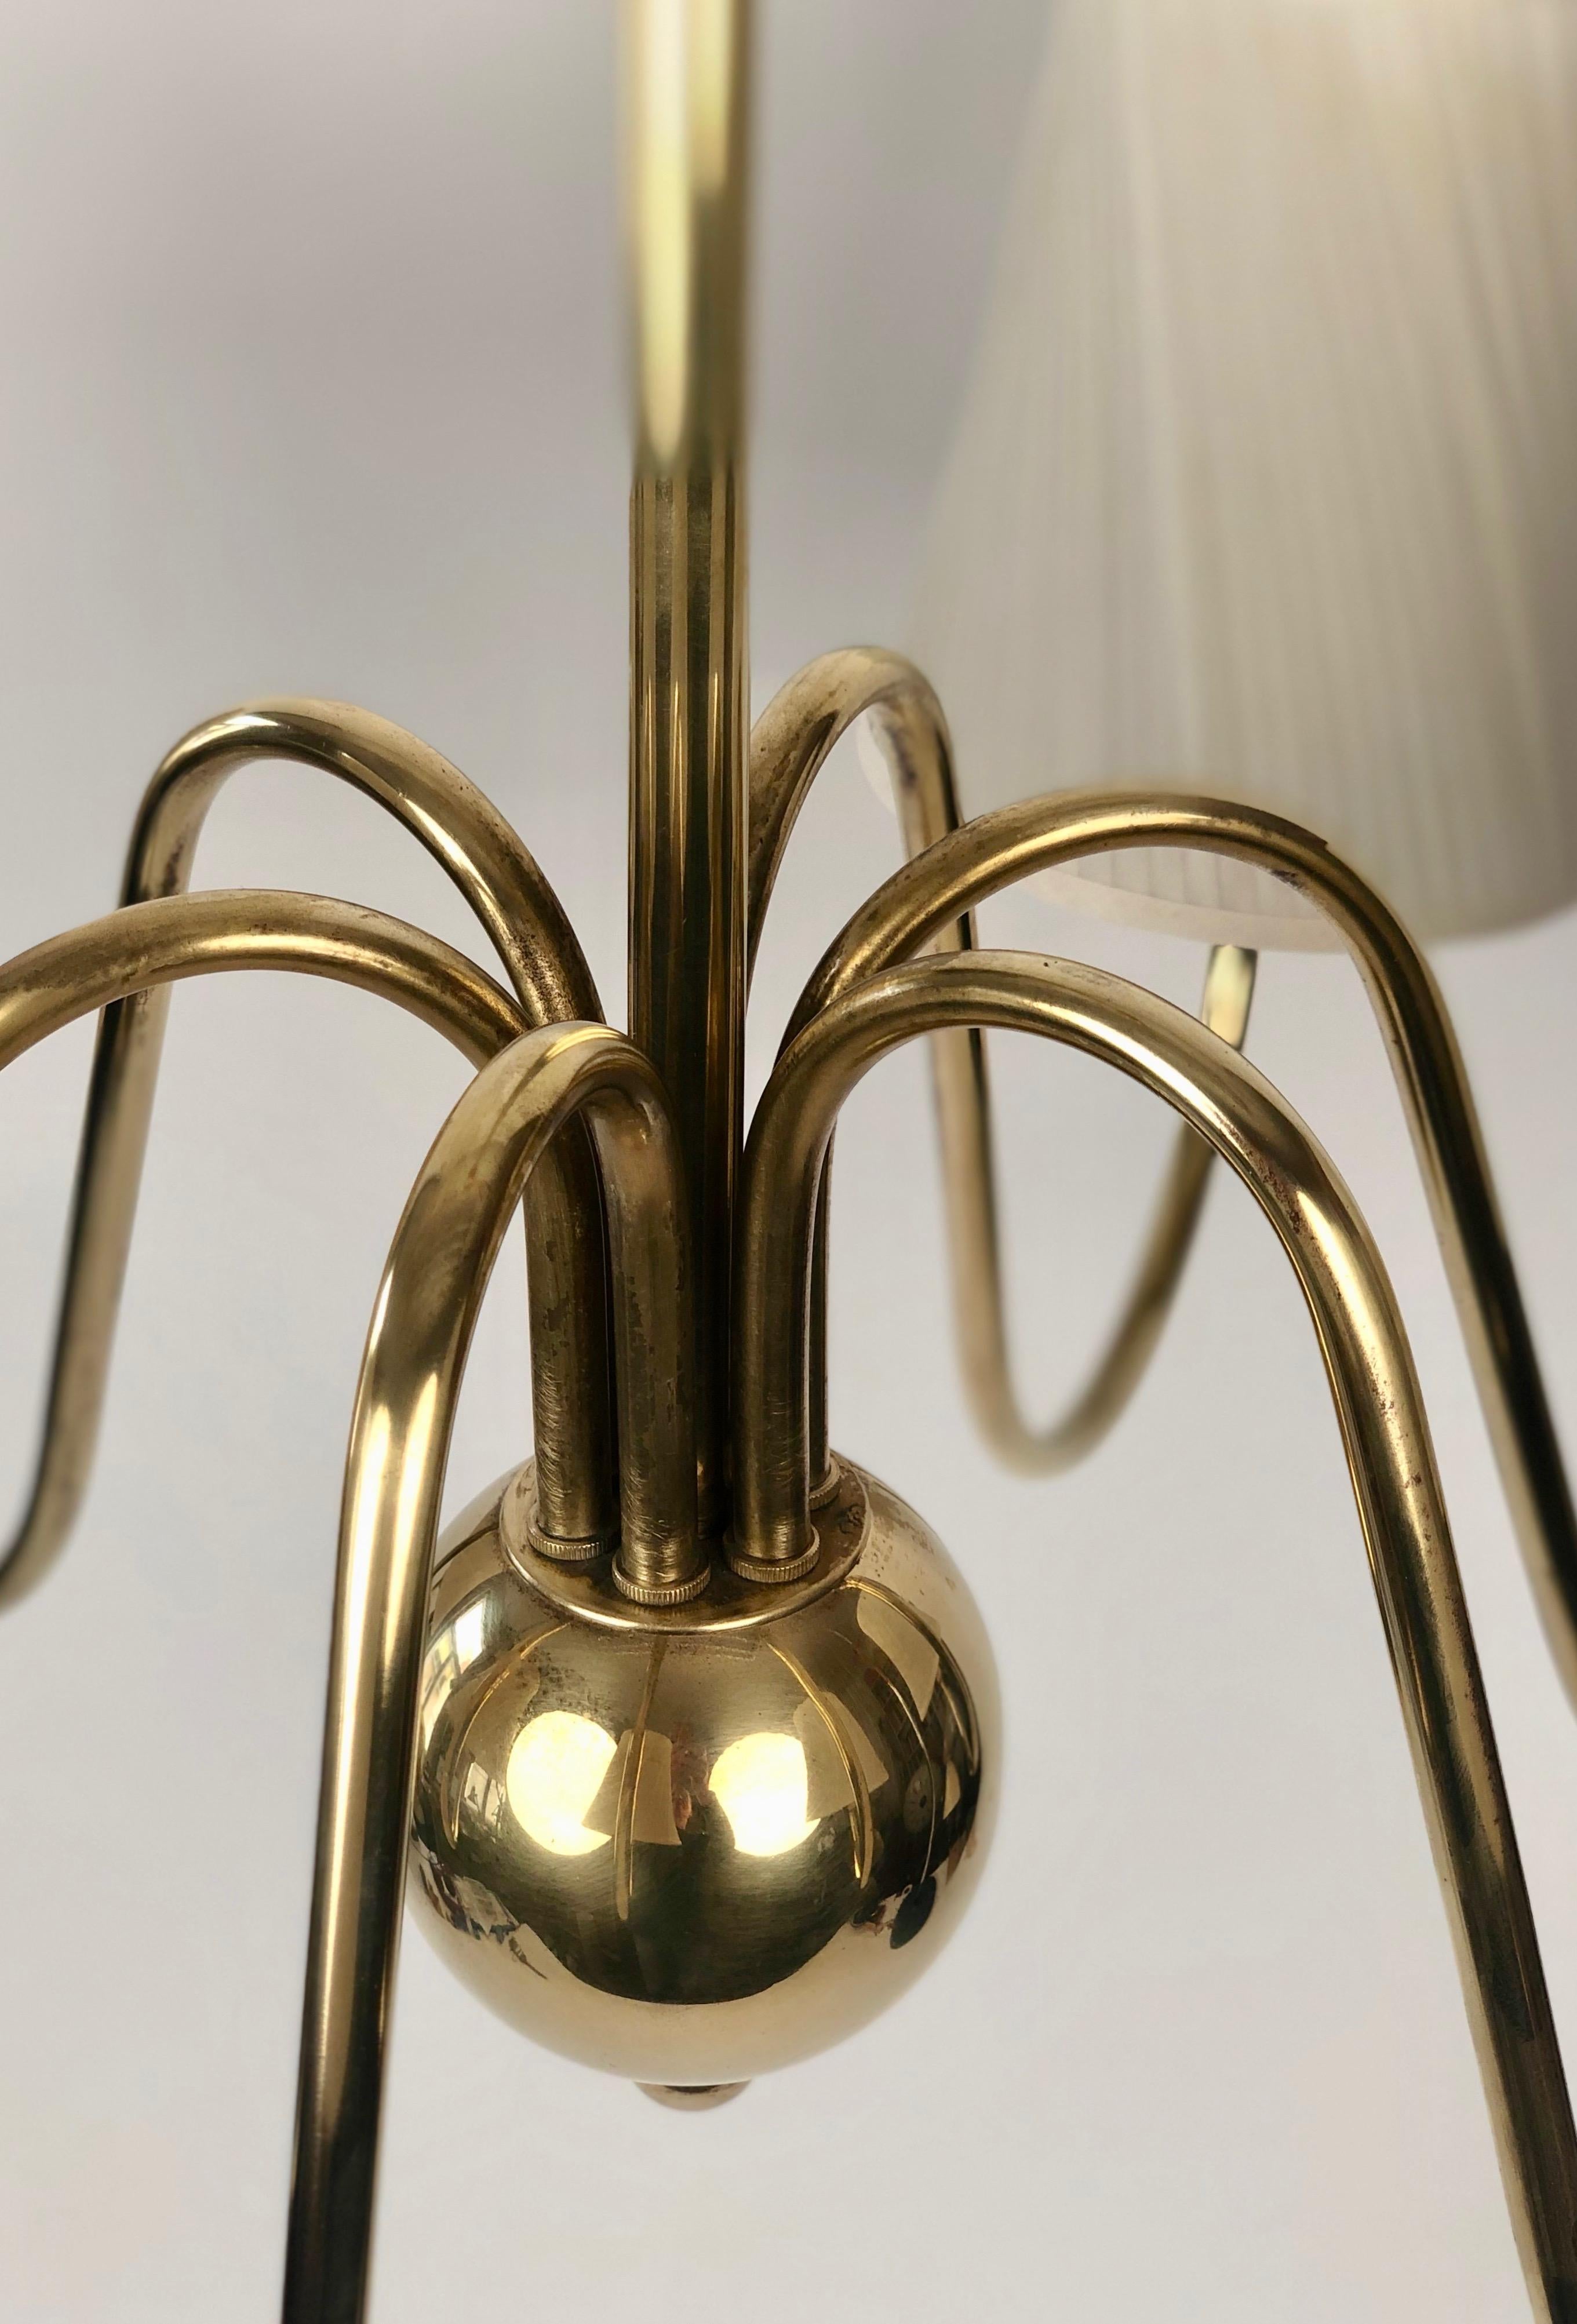 Mid-20th Century Six Arm chandelier in Brass from Josef Frank with Silk Shades, made in Austria For Sale